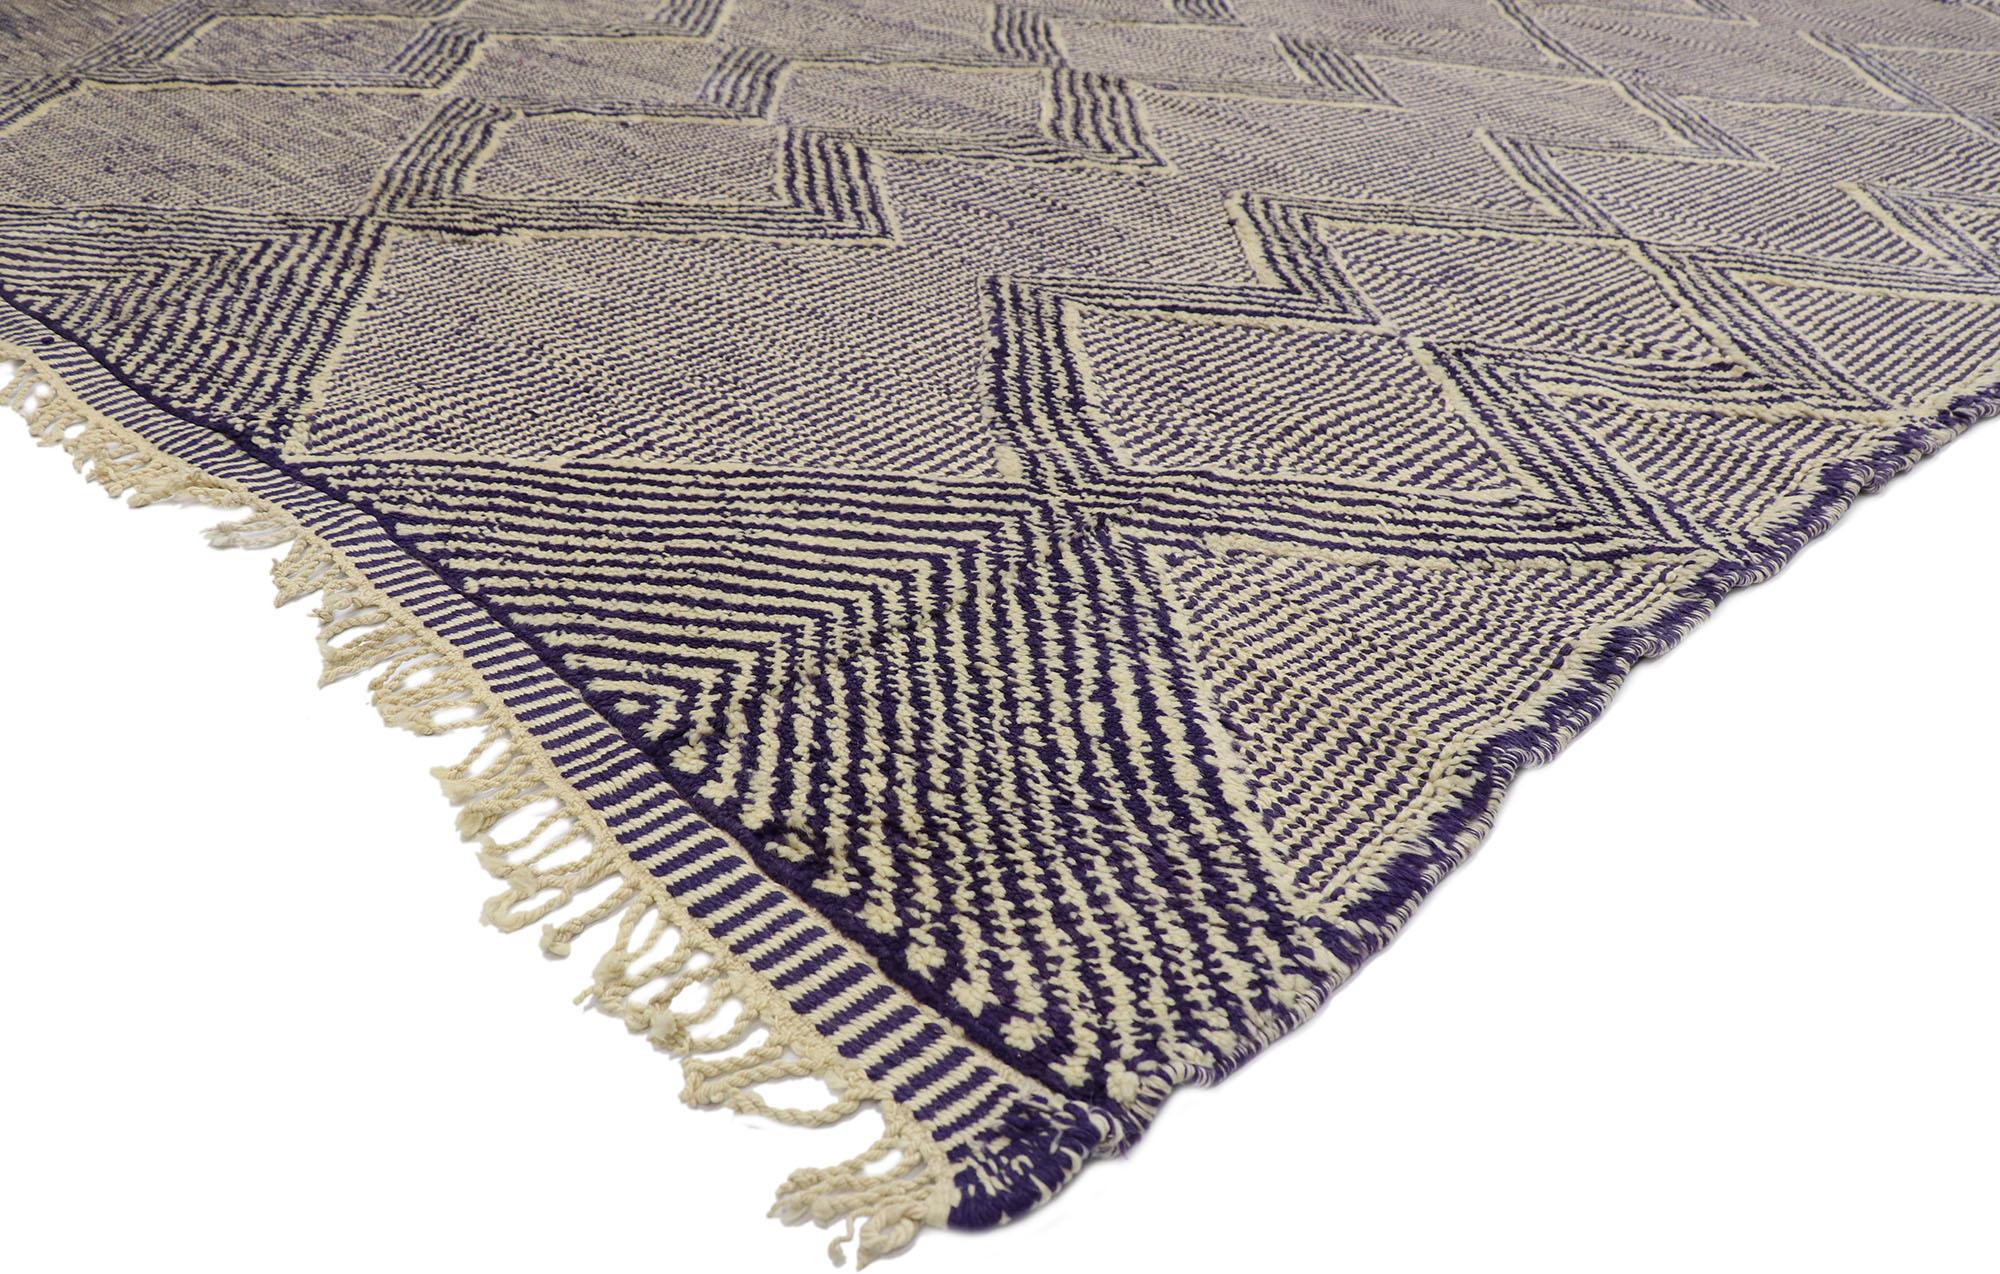 21166 New contemporary Berber Moroccan Kilim Souf rug with Bohemian Style 10'02 x 12'09. With a strong sense of dimensionality and asymmetry, this hand-woven contemporary Berber Moroccan Kilim rug is engaging, yet well balanced creating a striking